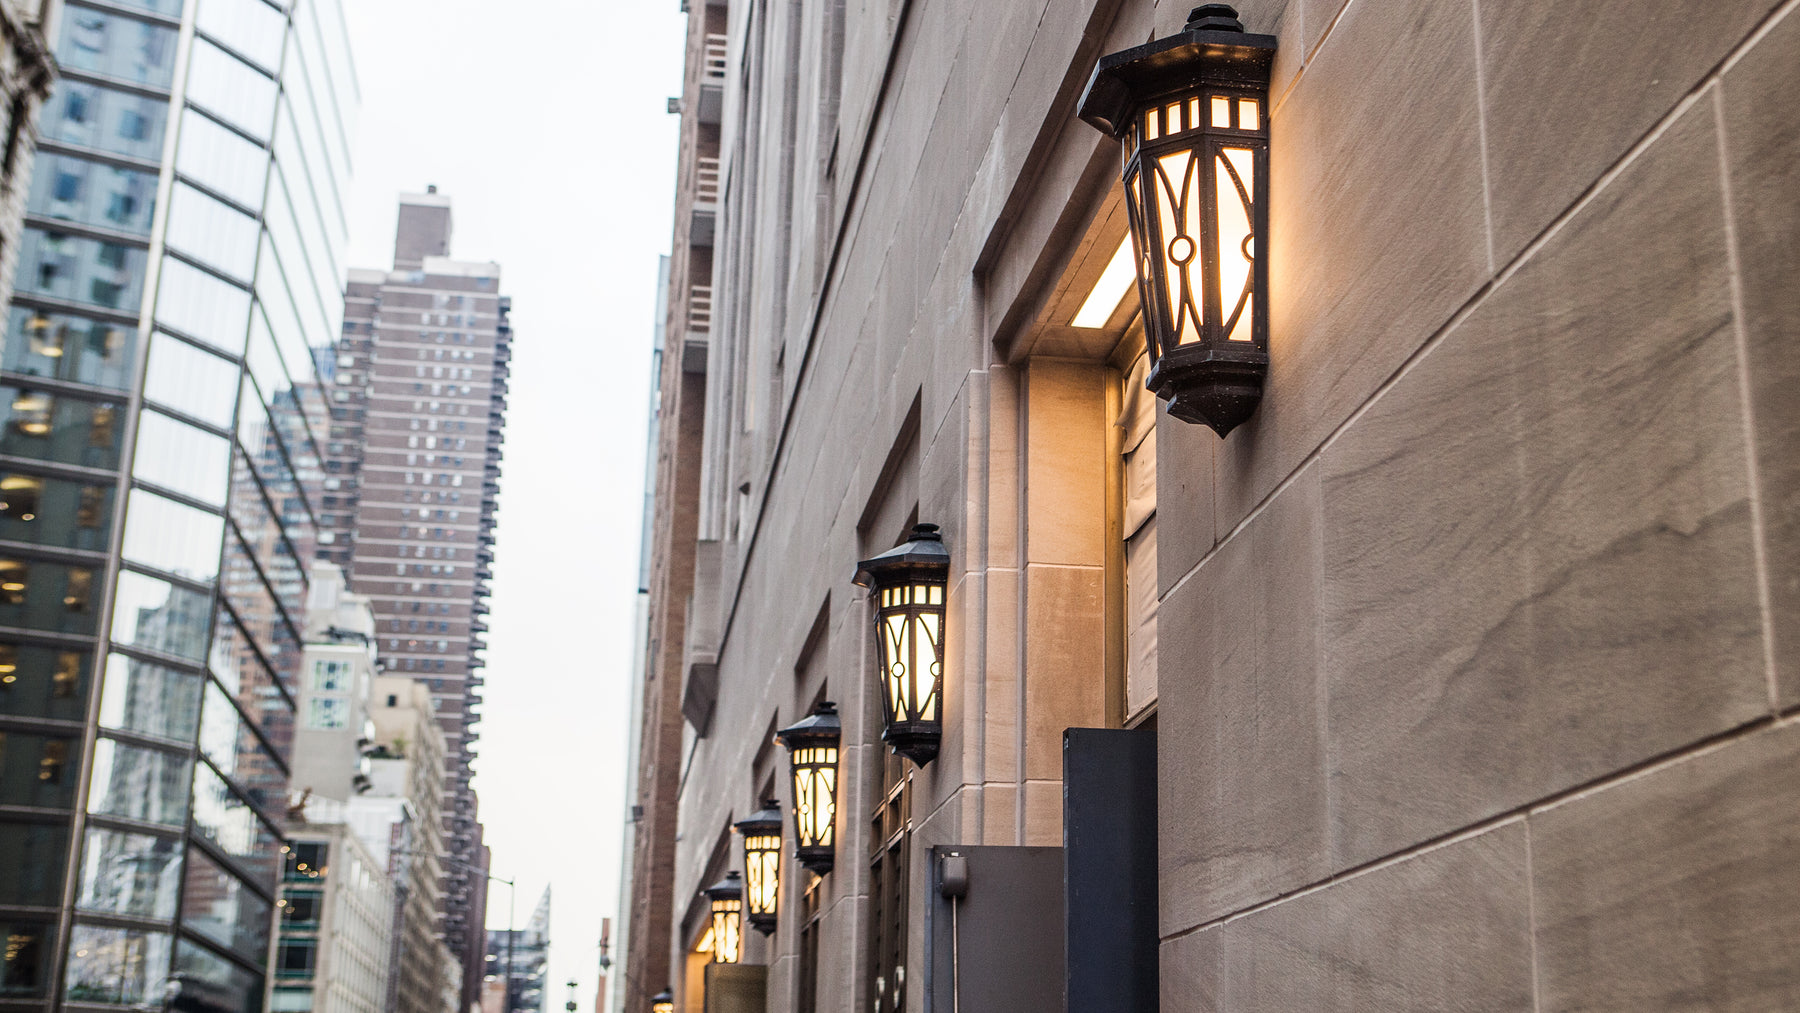 A group of traditional bronze and opal glass exterior wall sconces shown lit along the limestone wall of a New York City residential building on Central Park South